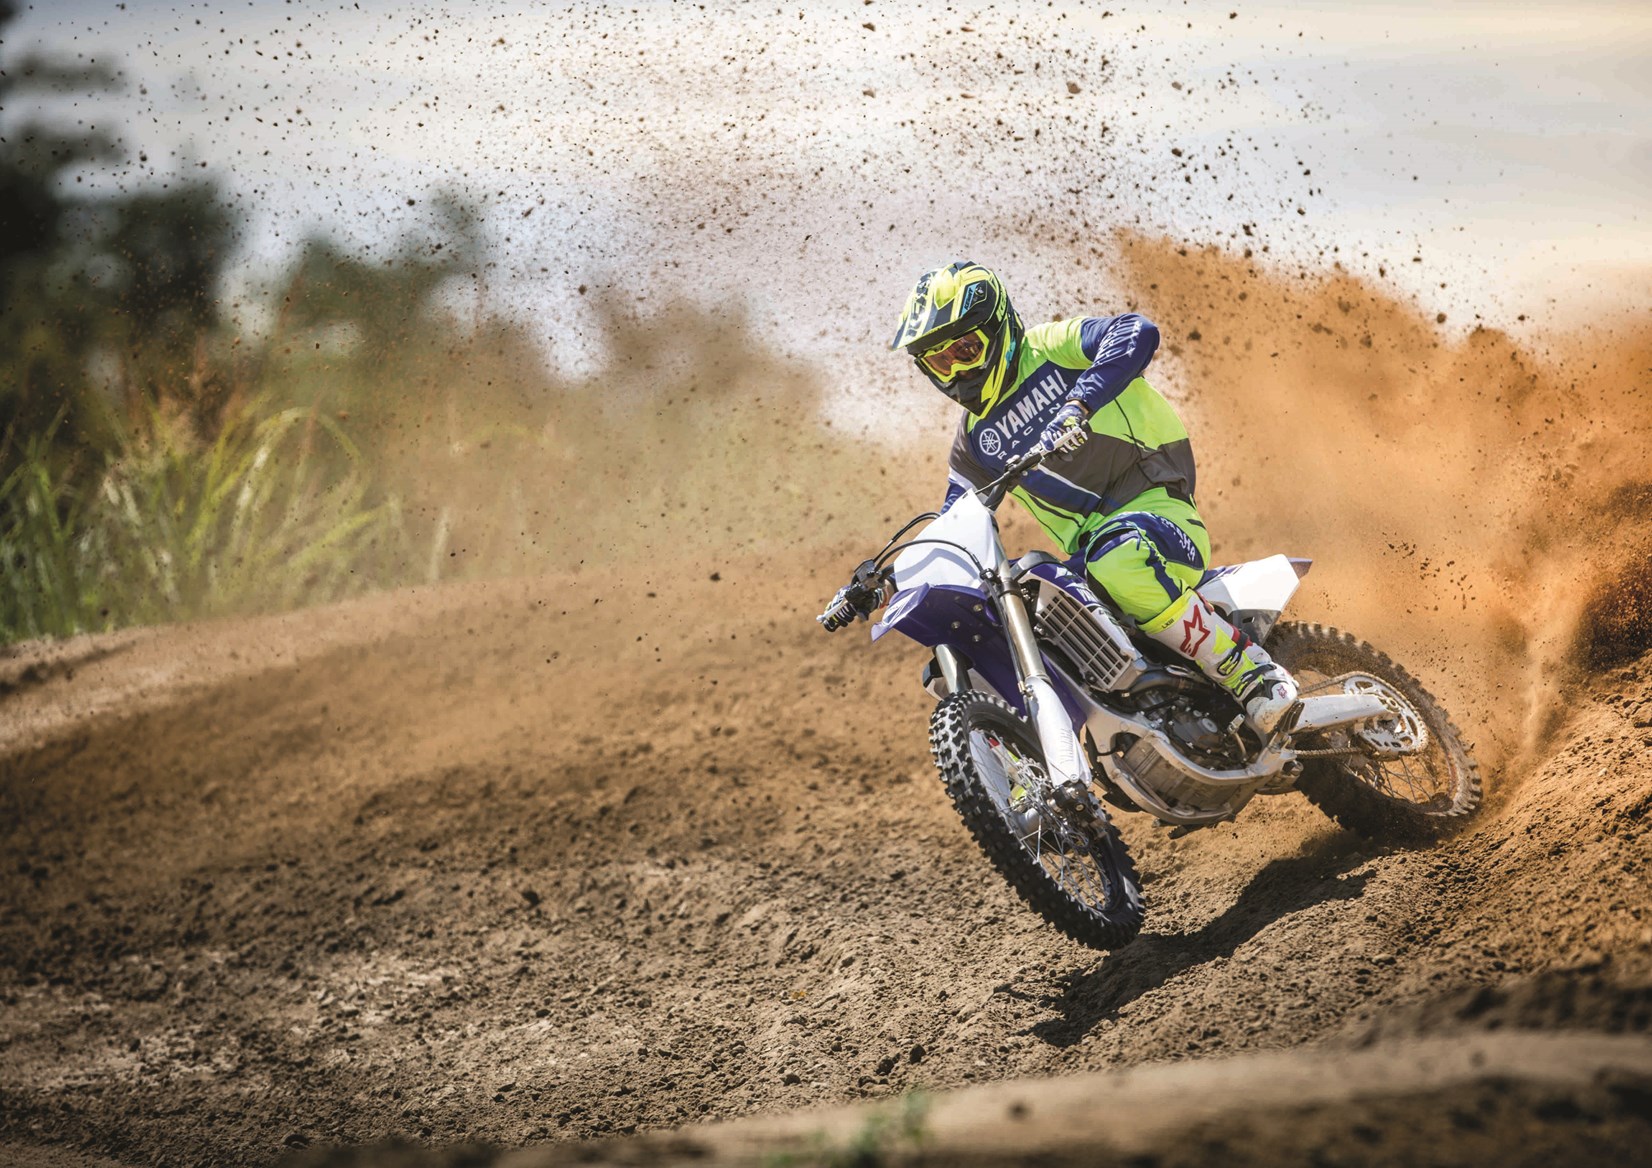 Try out 2017 Yamaha motocross models | MCN